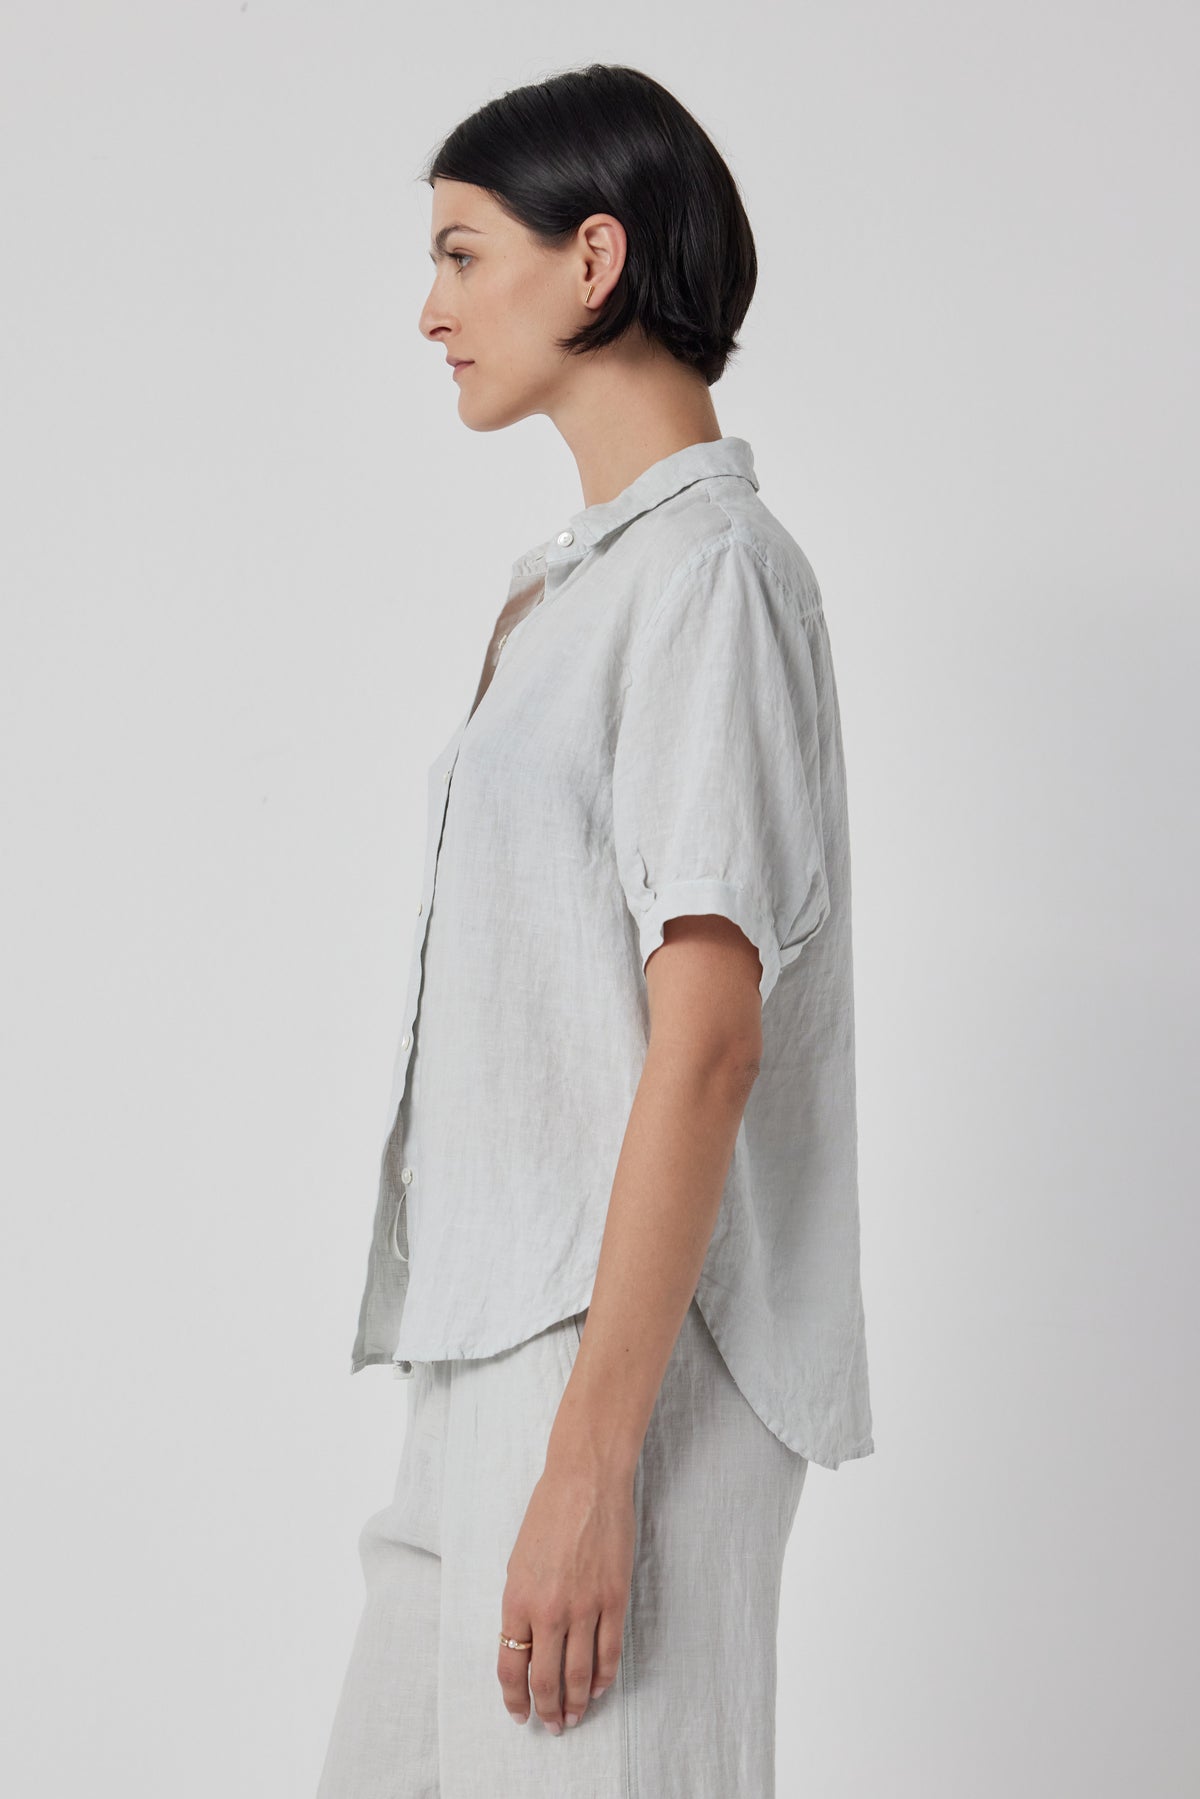 Profile view of a woman with short black hair wearing a Velvet by Jenny Graham Claremont Linen Shirt in light gray, standing against a plain background.-36168678342849